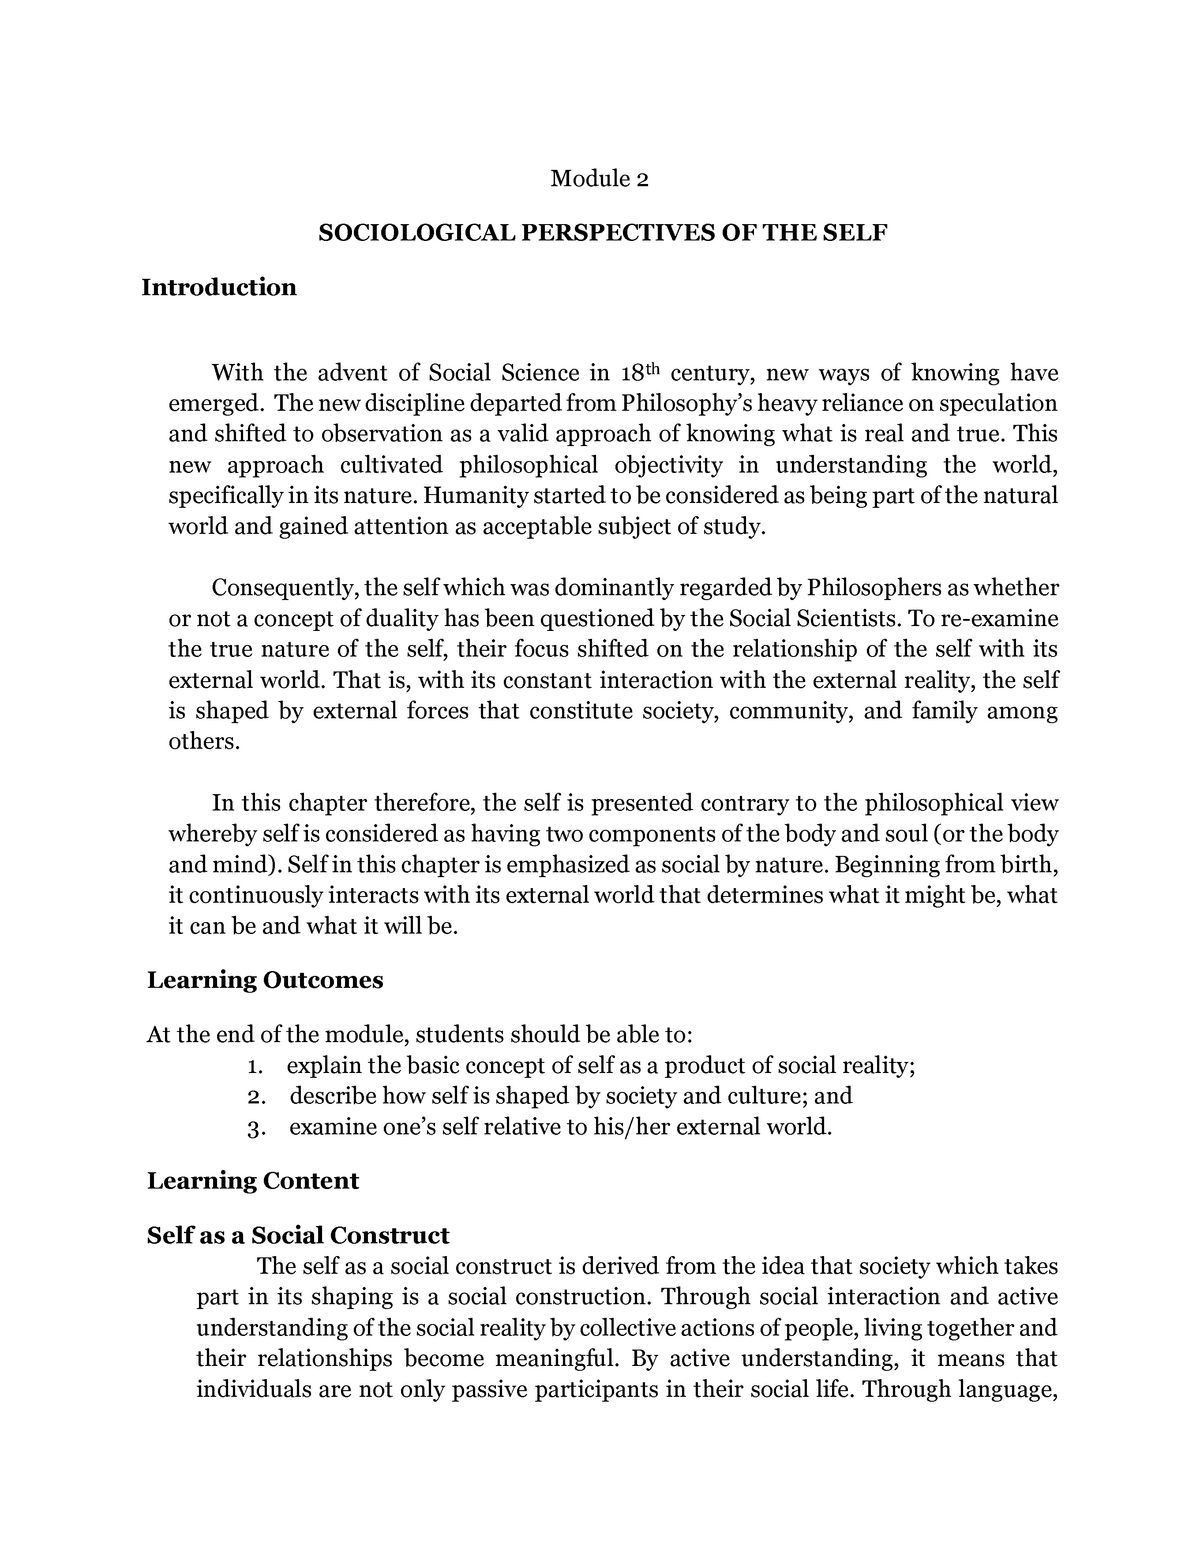 sociological perspective of self essay